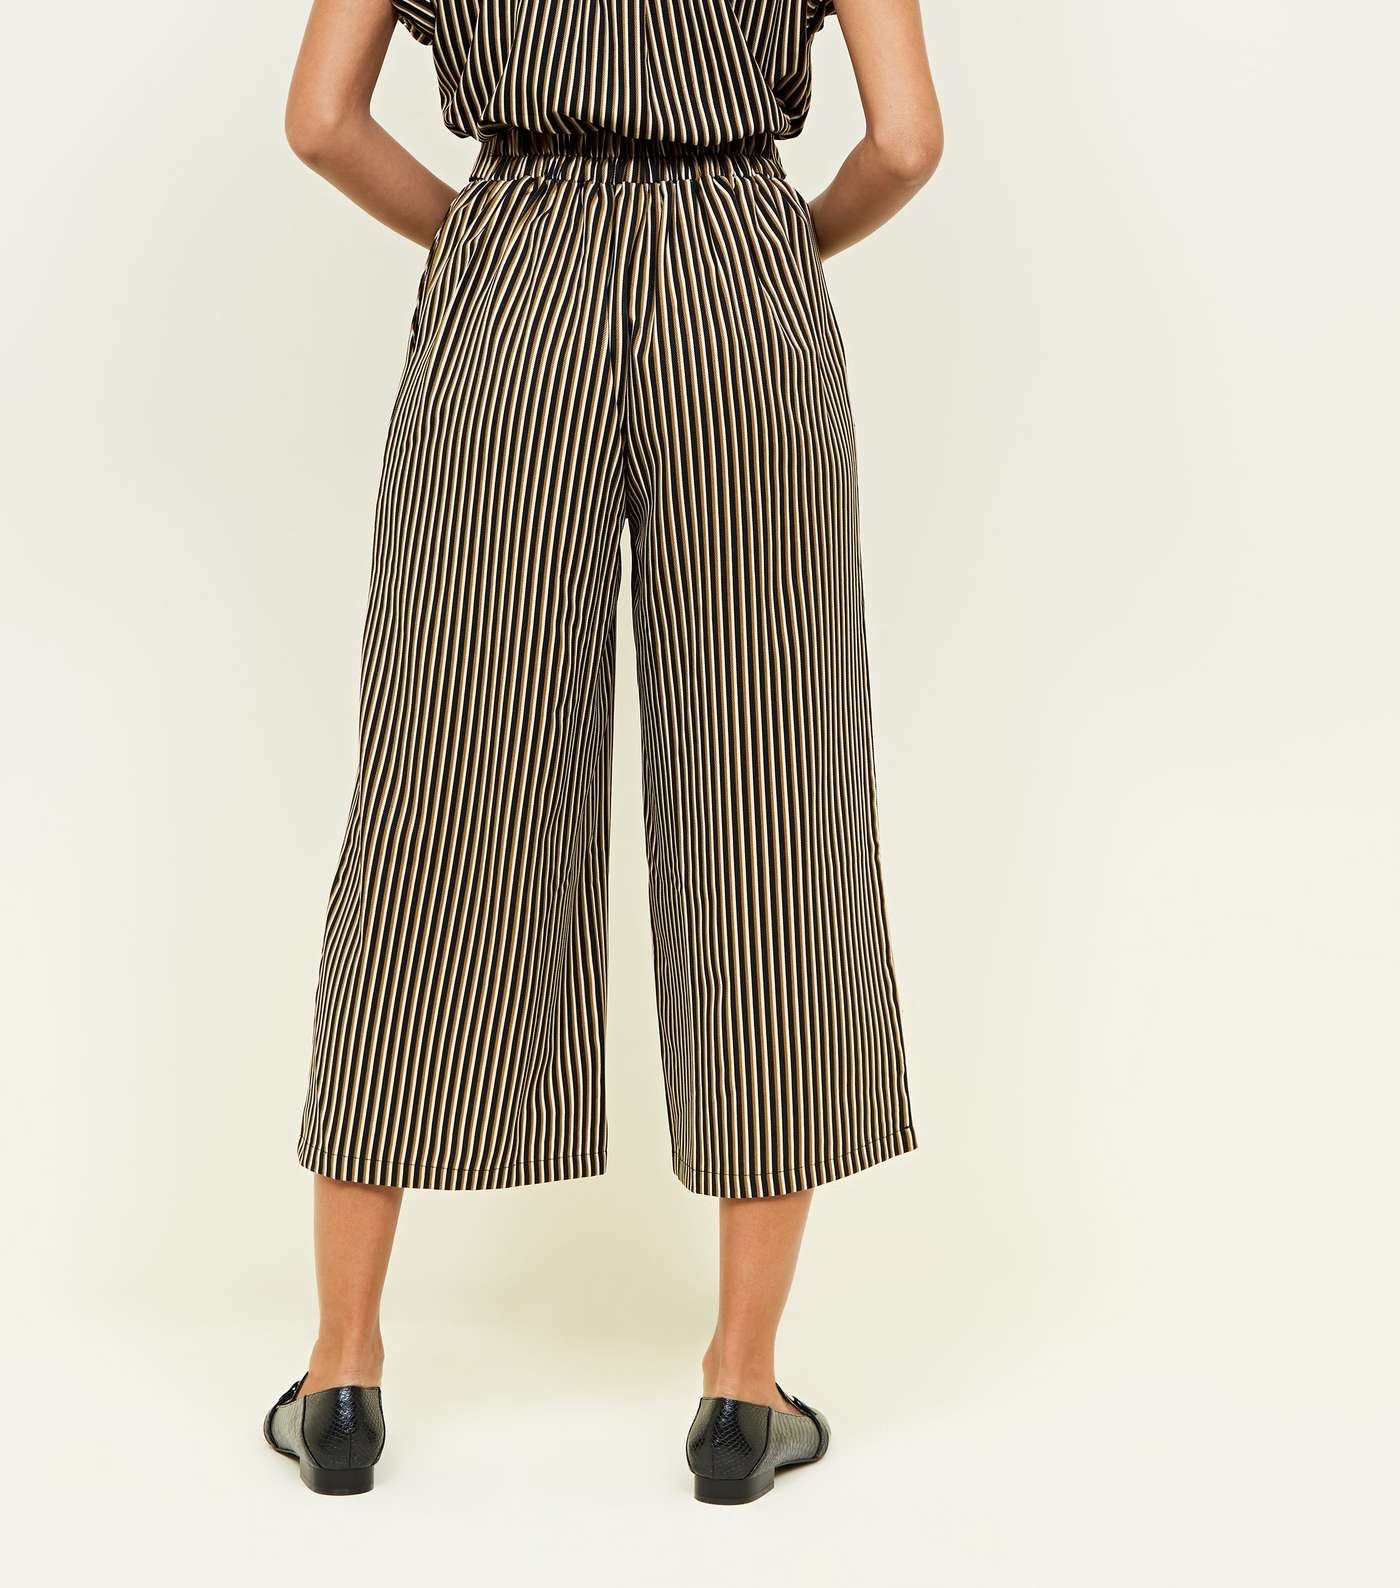 Black Stripe Twill Belted Culottes Image 3